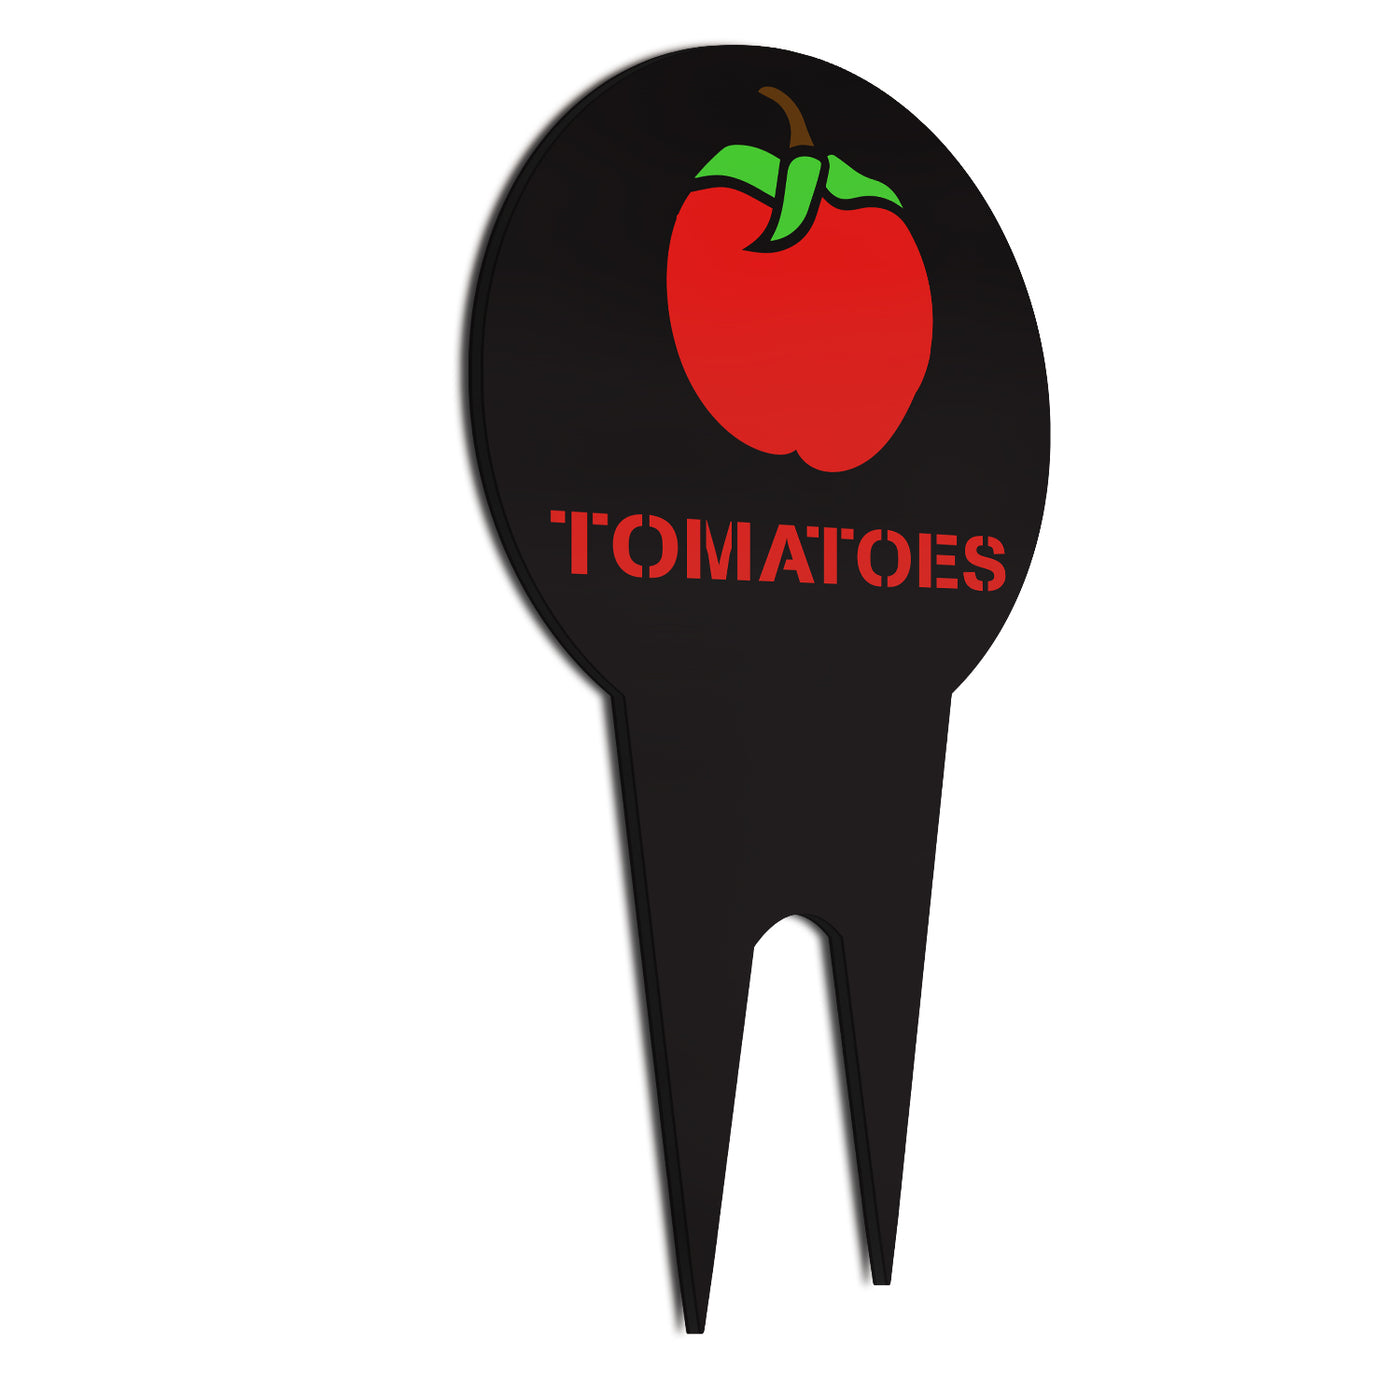 Crop Marker Tomatoes